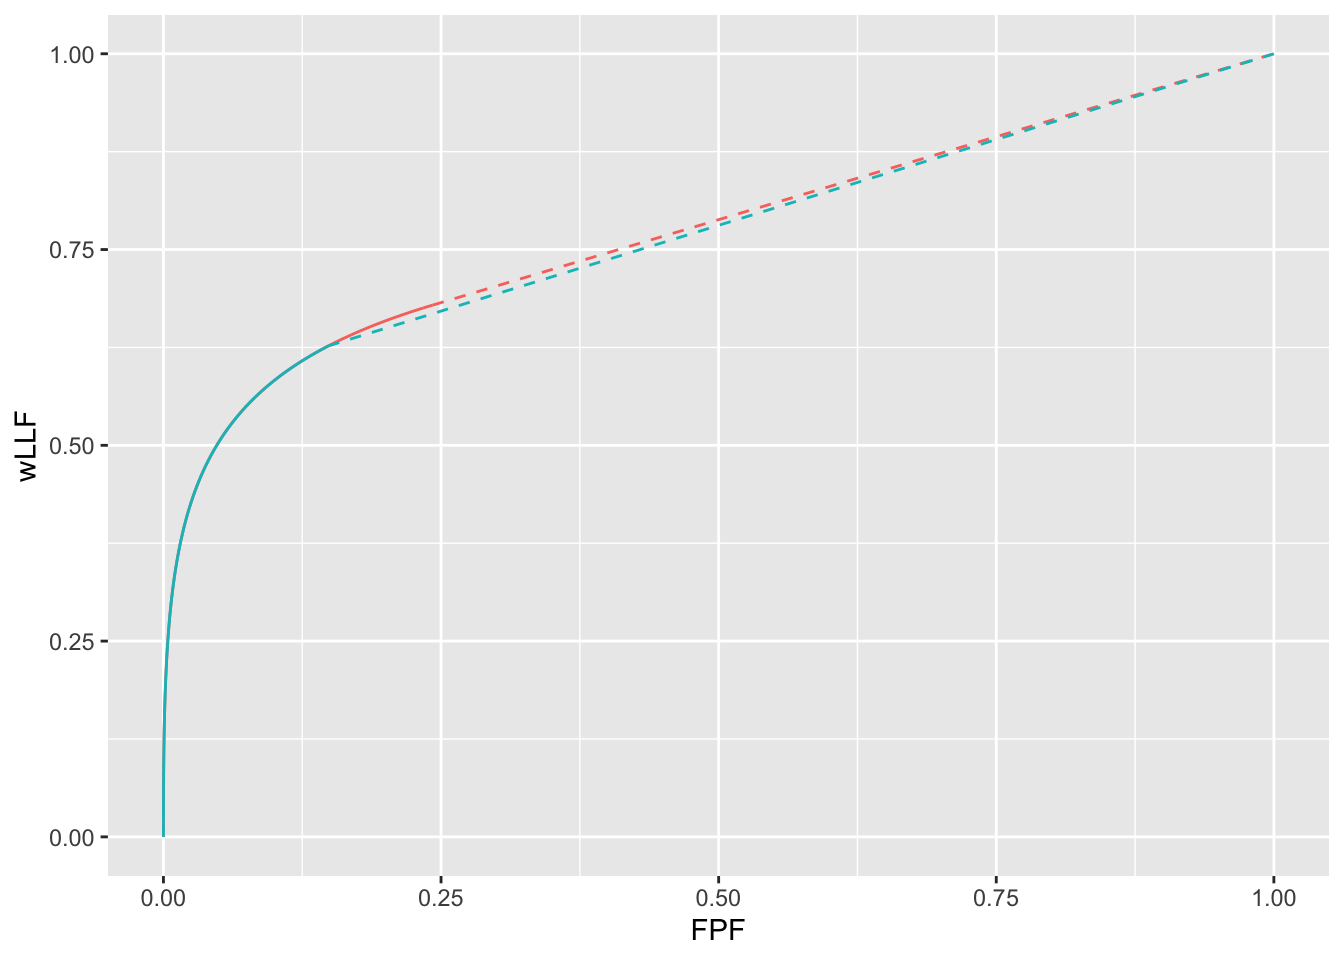 Red line and dots: wAFROC-AUC based optimization; blue line and dots: Youden-index based optimization. The two wAFROC-AUCs are 0.774 and 0.770, respectively.